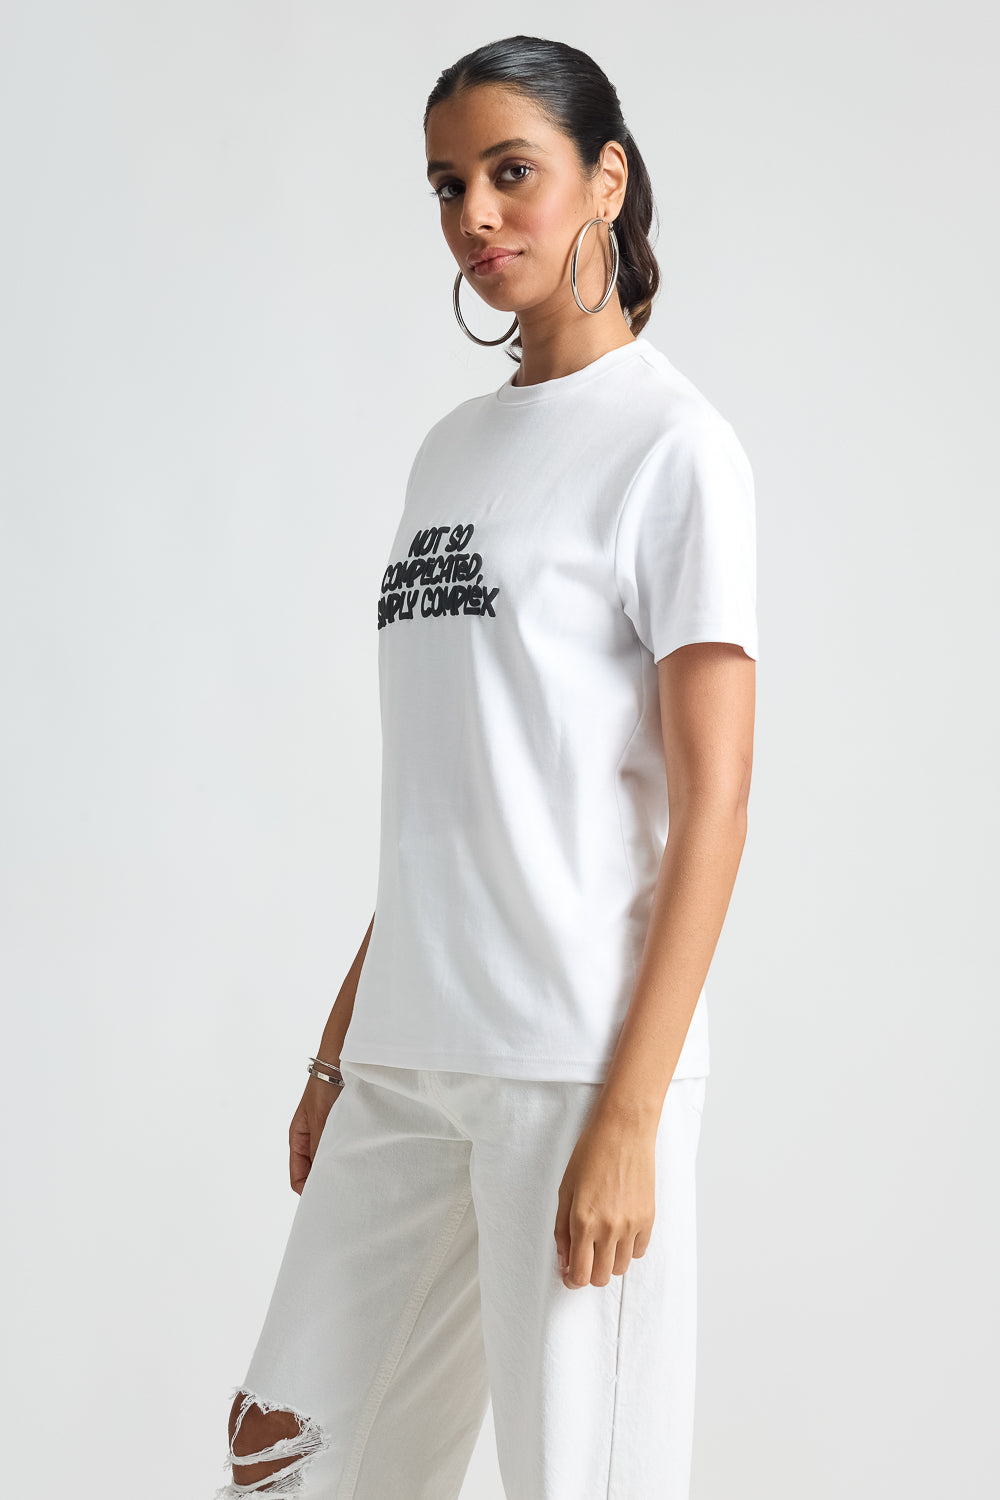 White Not So Complicated Tee